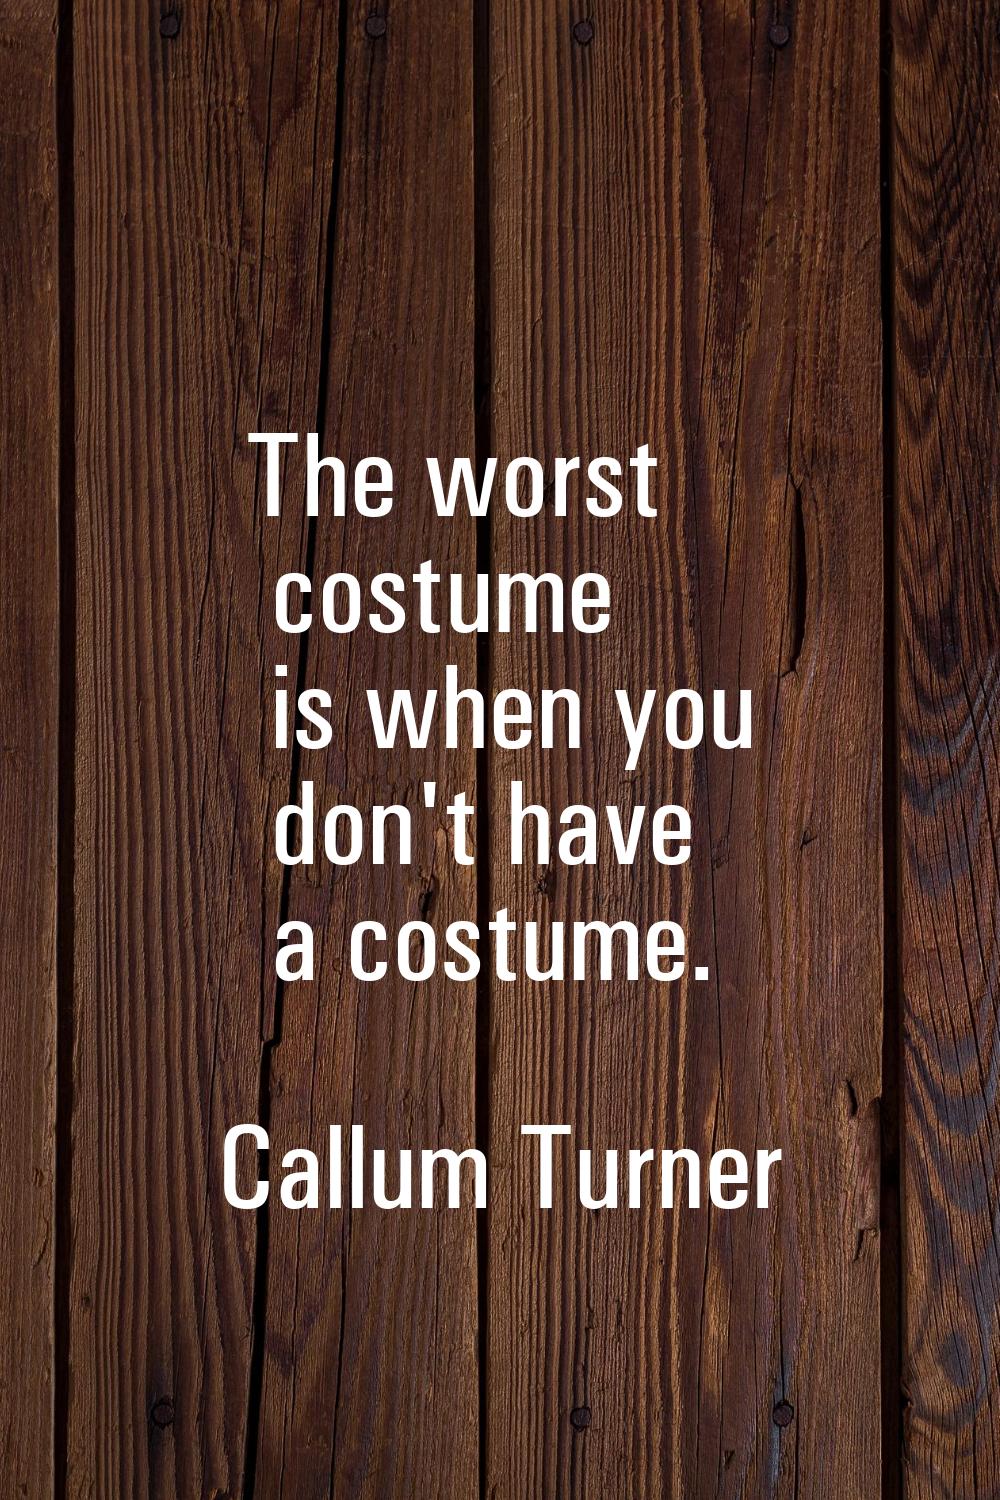 The worst costume is when you don't have a costume.